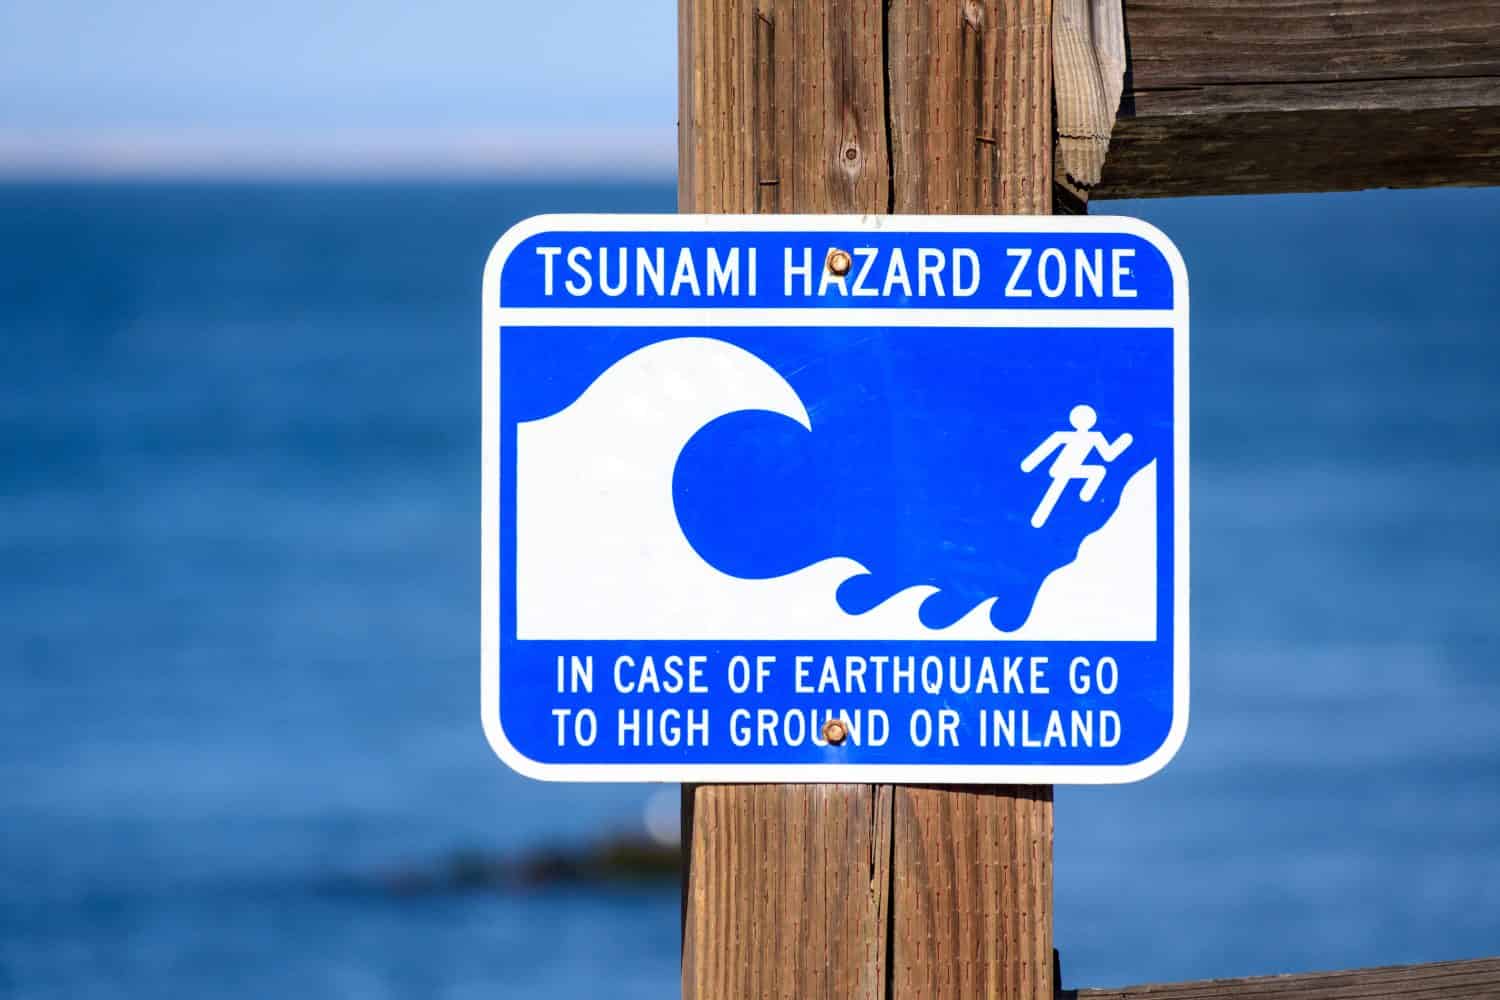 Tsunami Hazard Zone warning sign on ocean coast warns the public about possible danger after an earthquake. Close up. Blurred blue ocean water in background